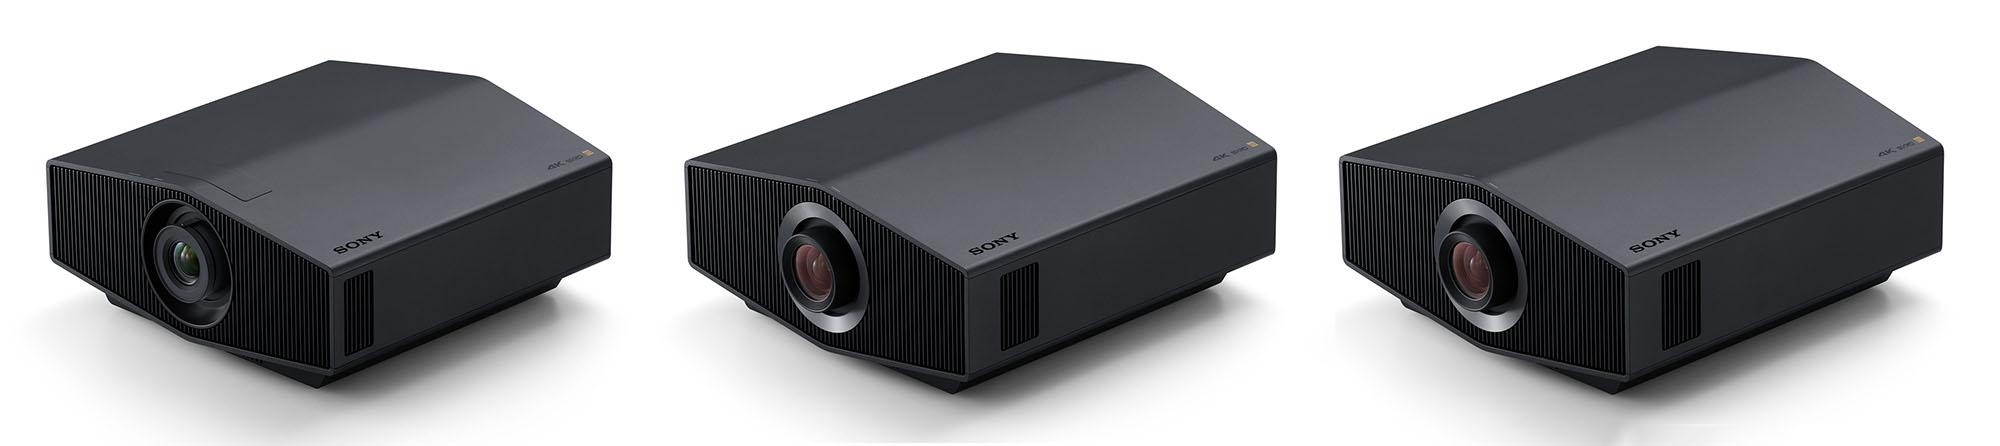 This is no mere annual refresh. Sony's three new home theater projectors are a generational leap forward. 9b9a8e83 three new sonys